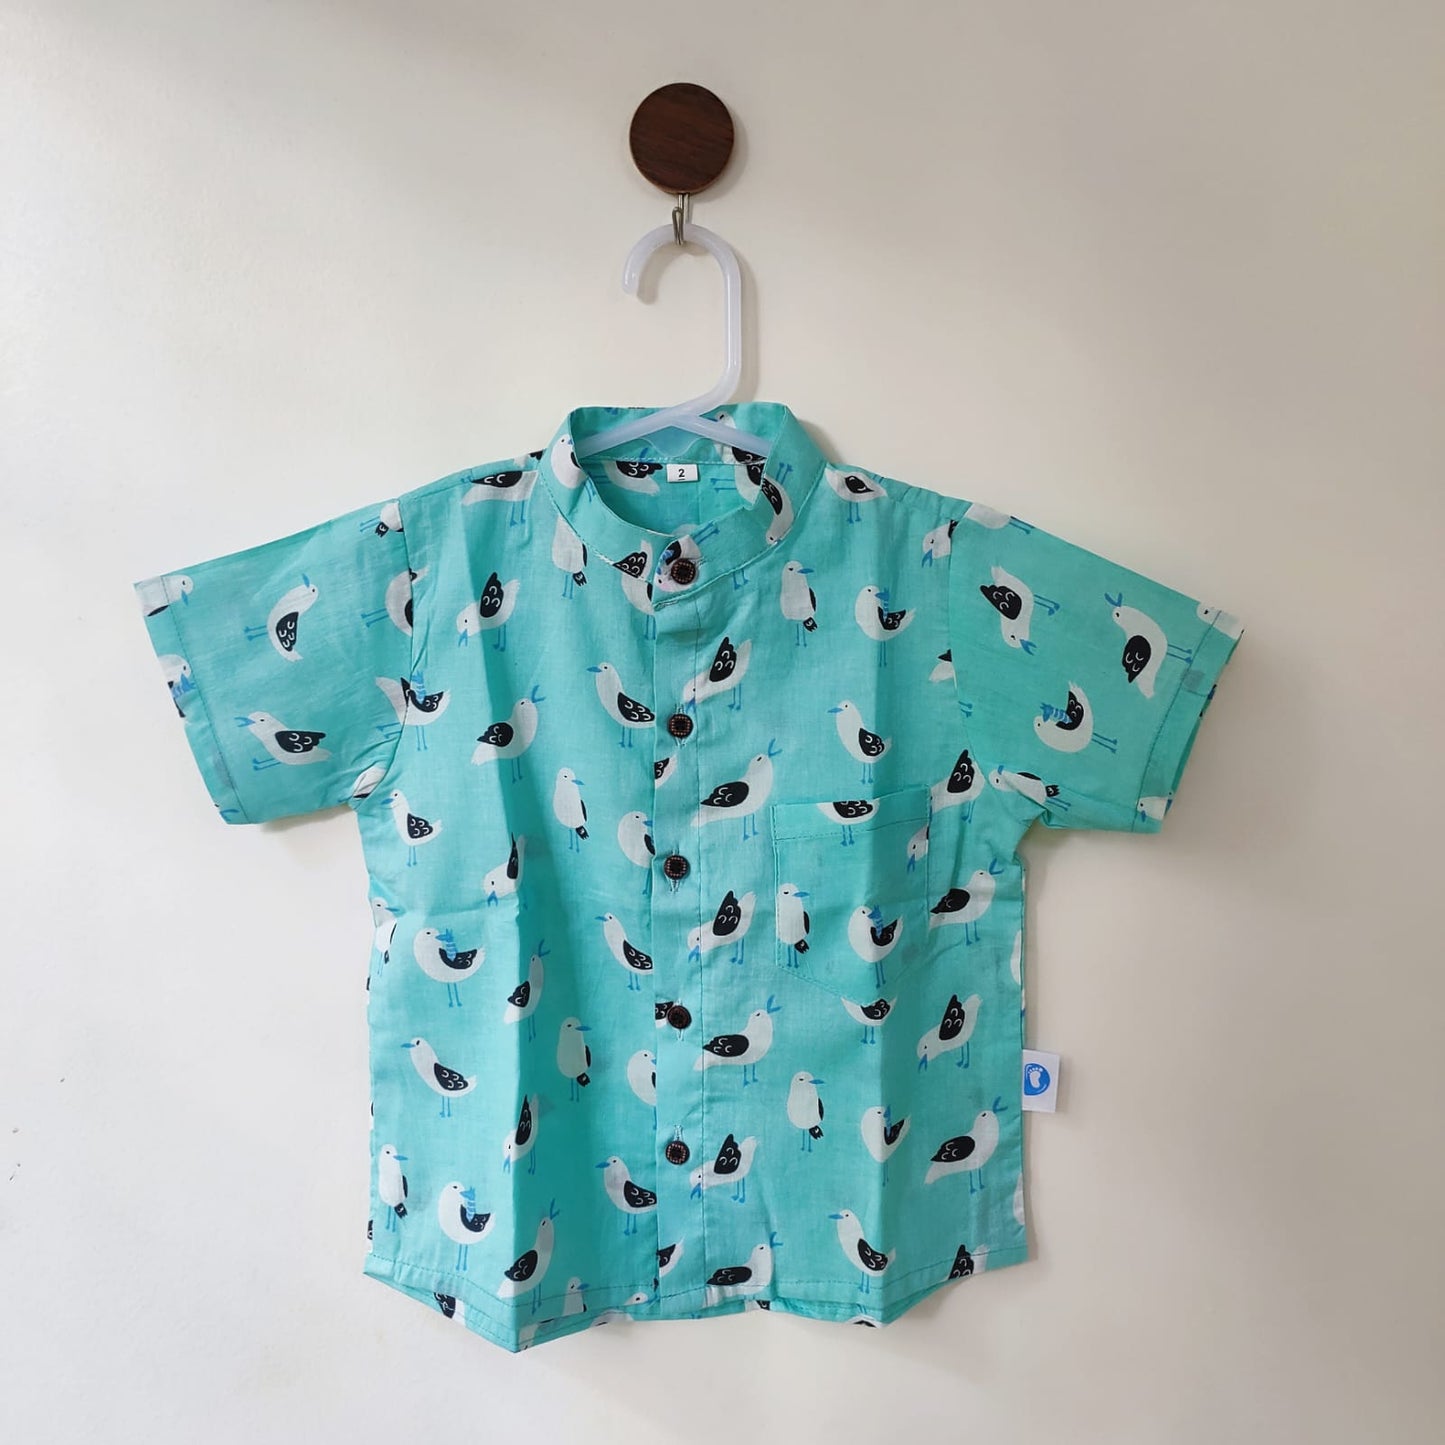 Cotton Shirt - Ocean blue with sparrows